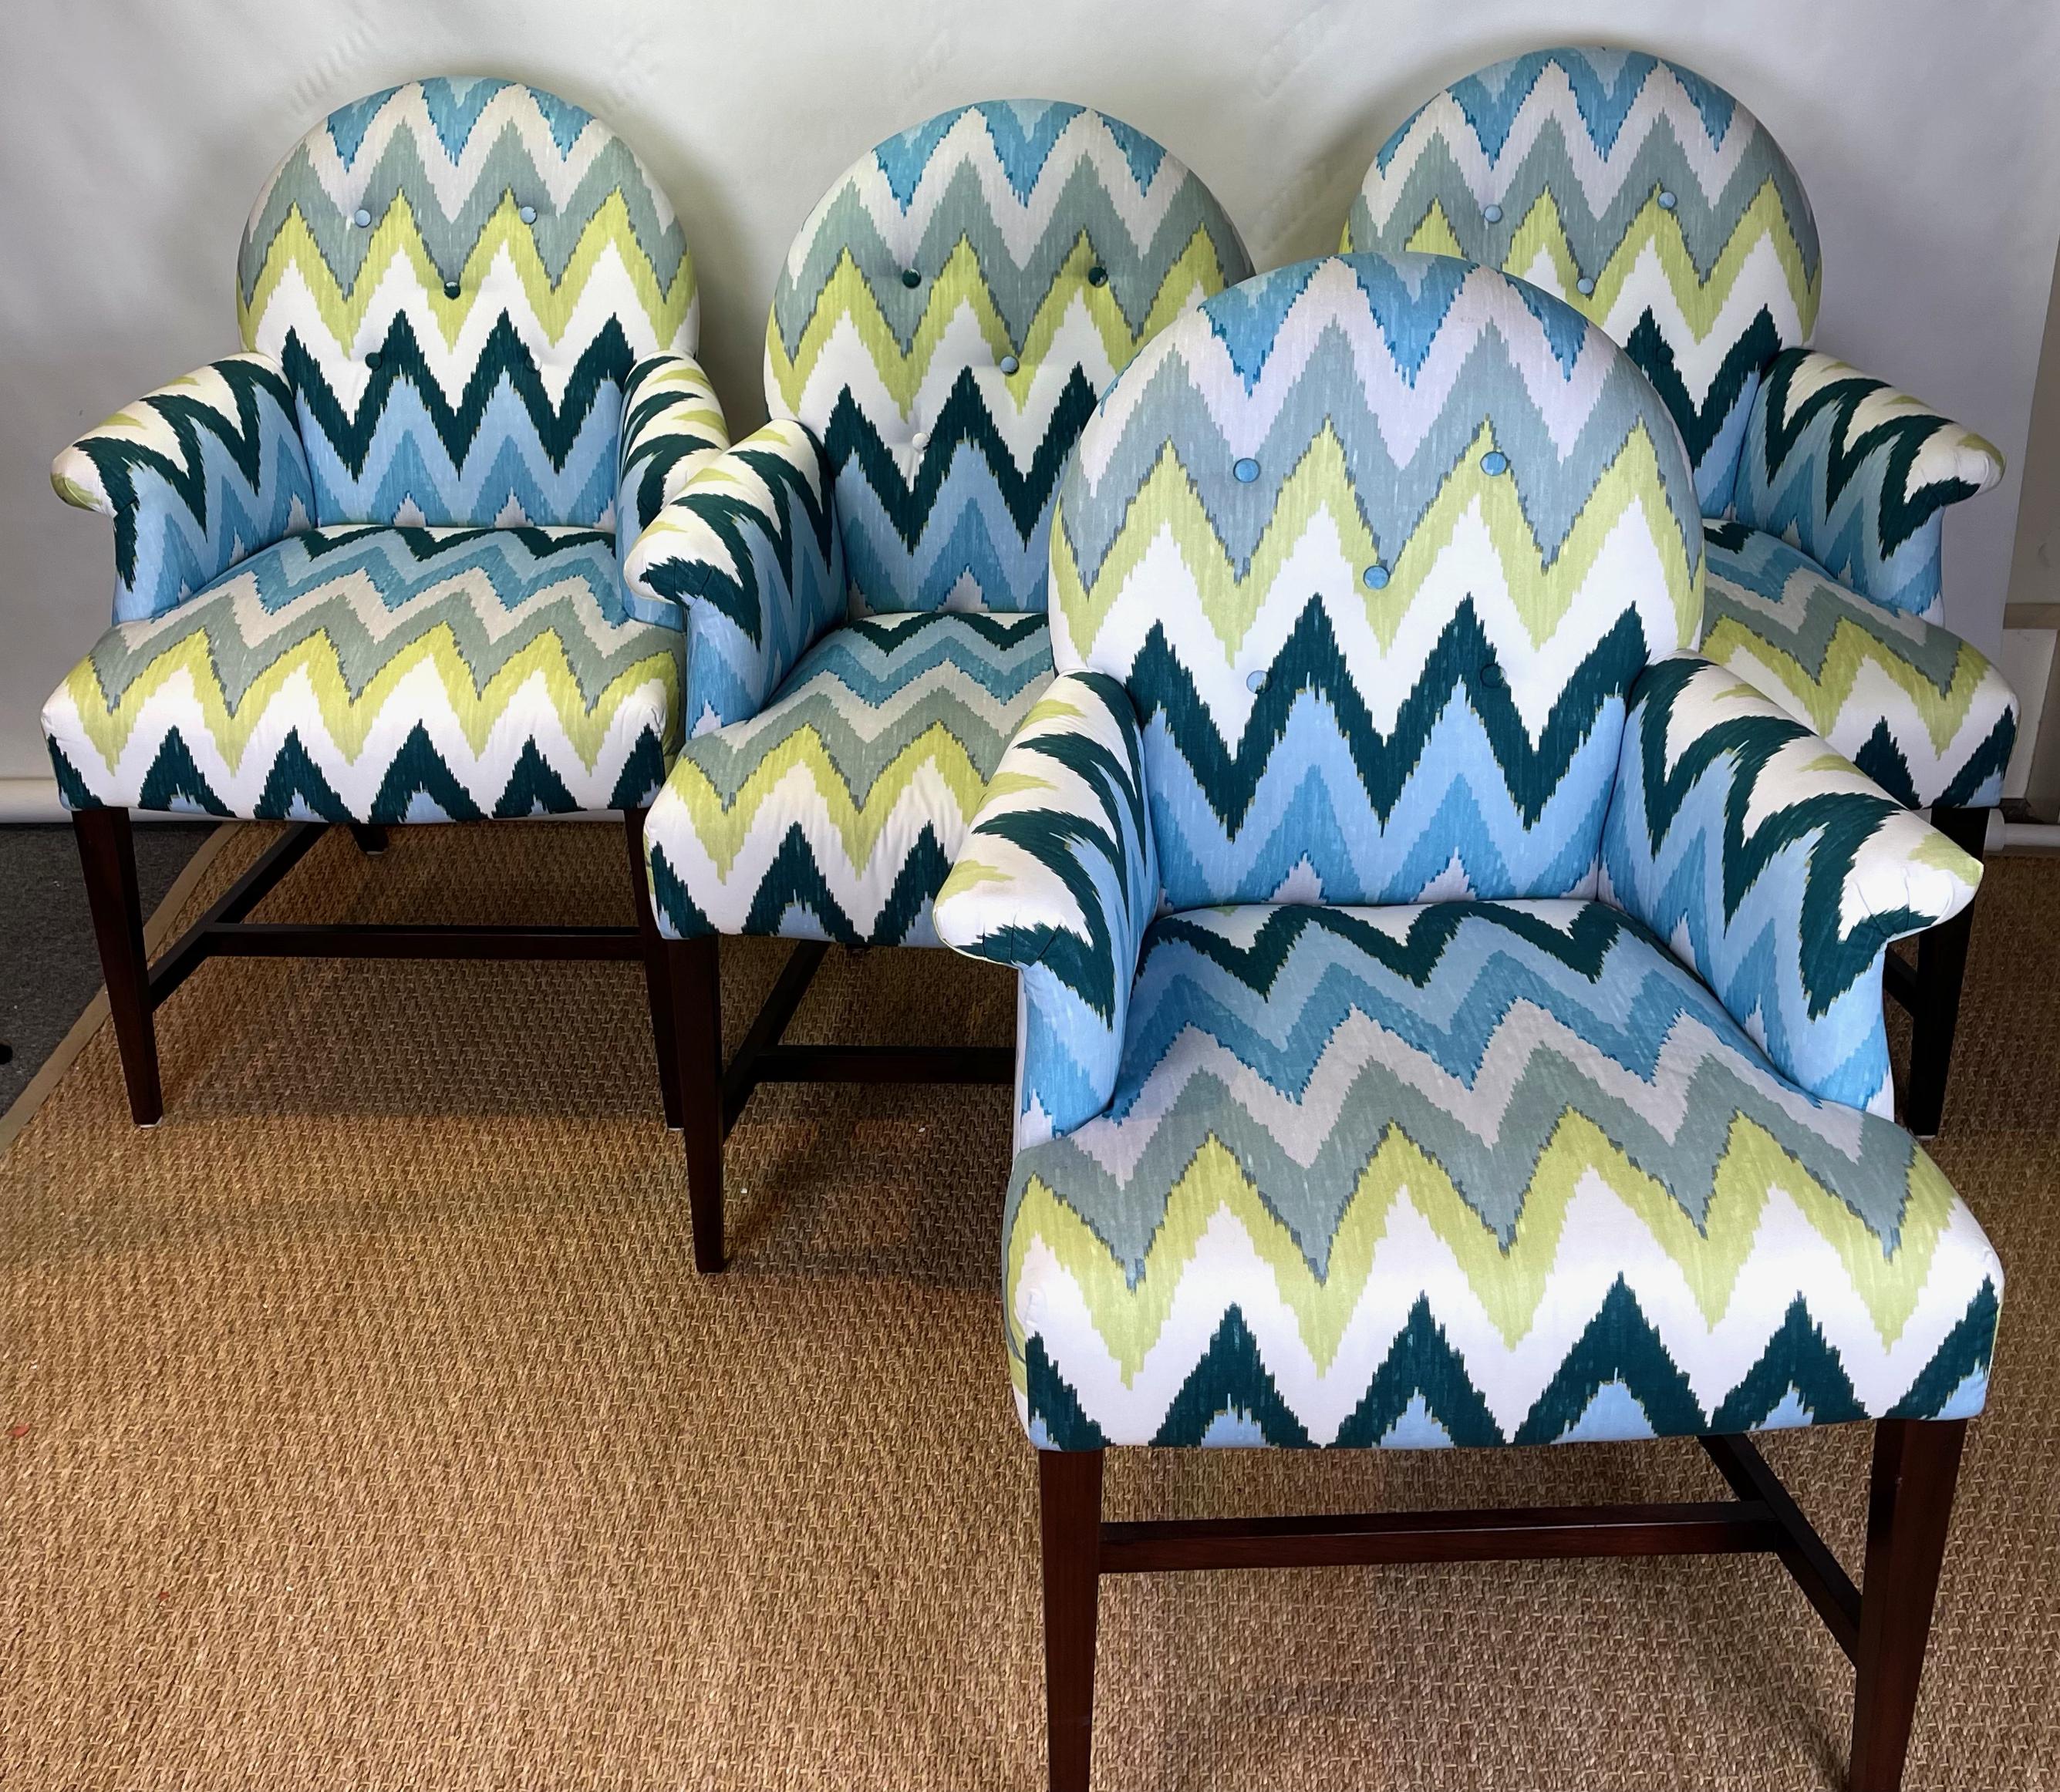 A set of four vintage upholstered arm chairs recently upholstered in a cotton ikat print fabric in blues, gray, white and green, resting on dark mahogany colored square tapering legs. Would make comfortable dining or games table chairs.